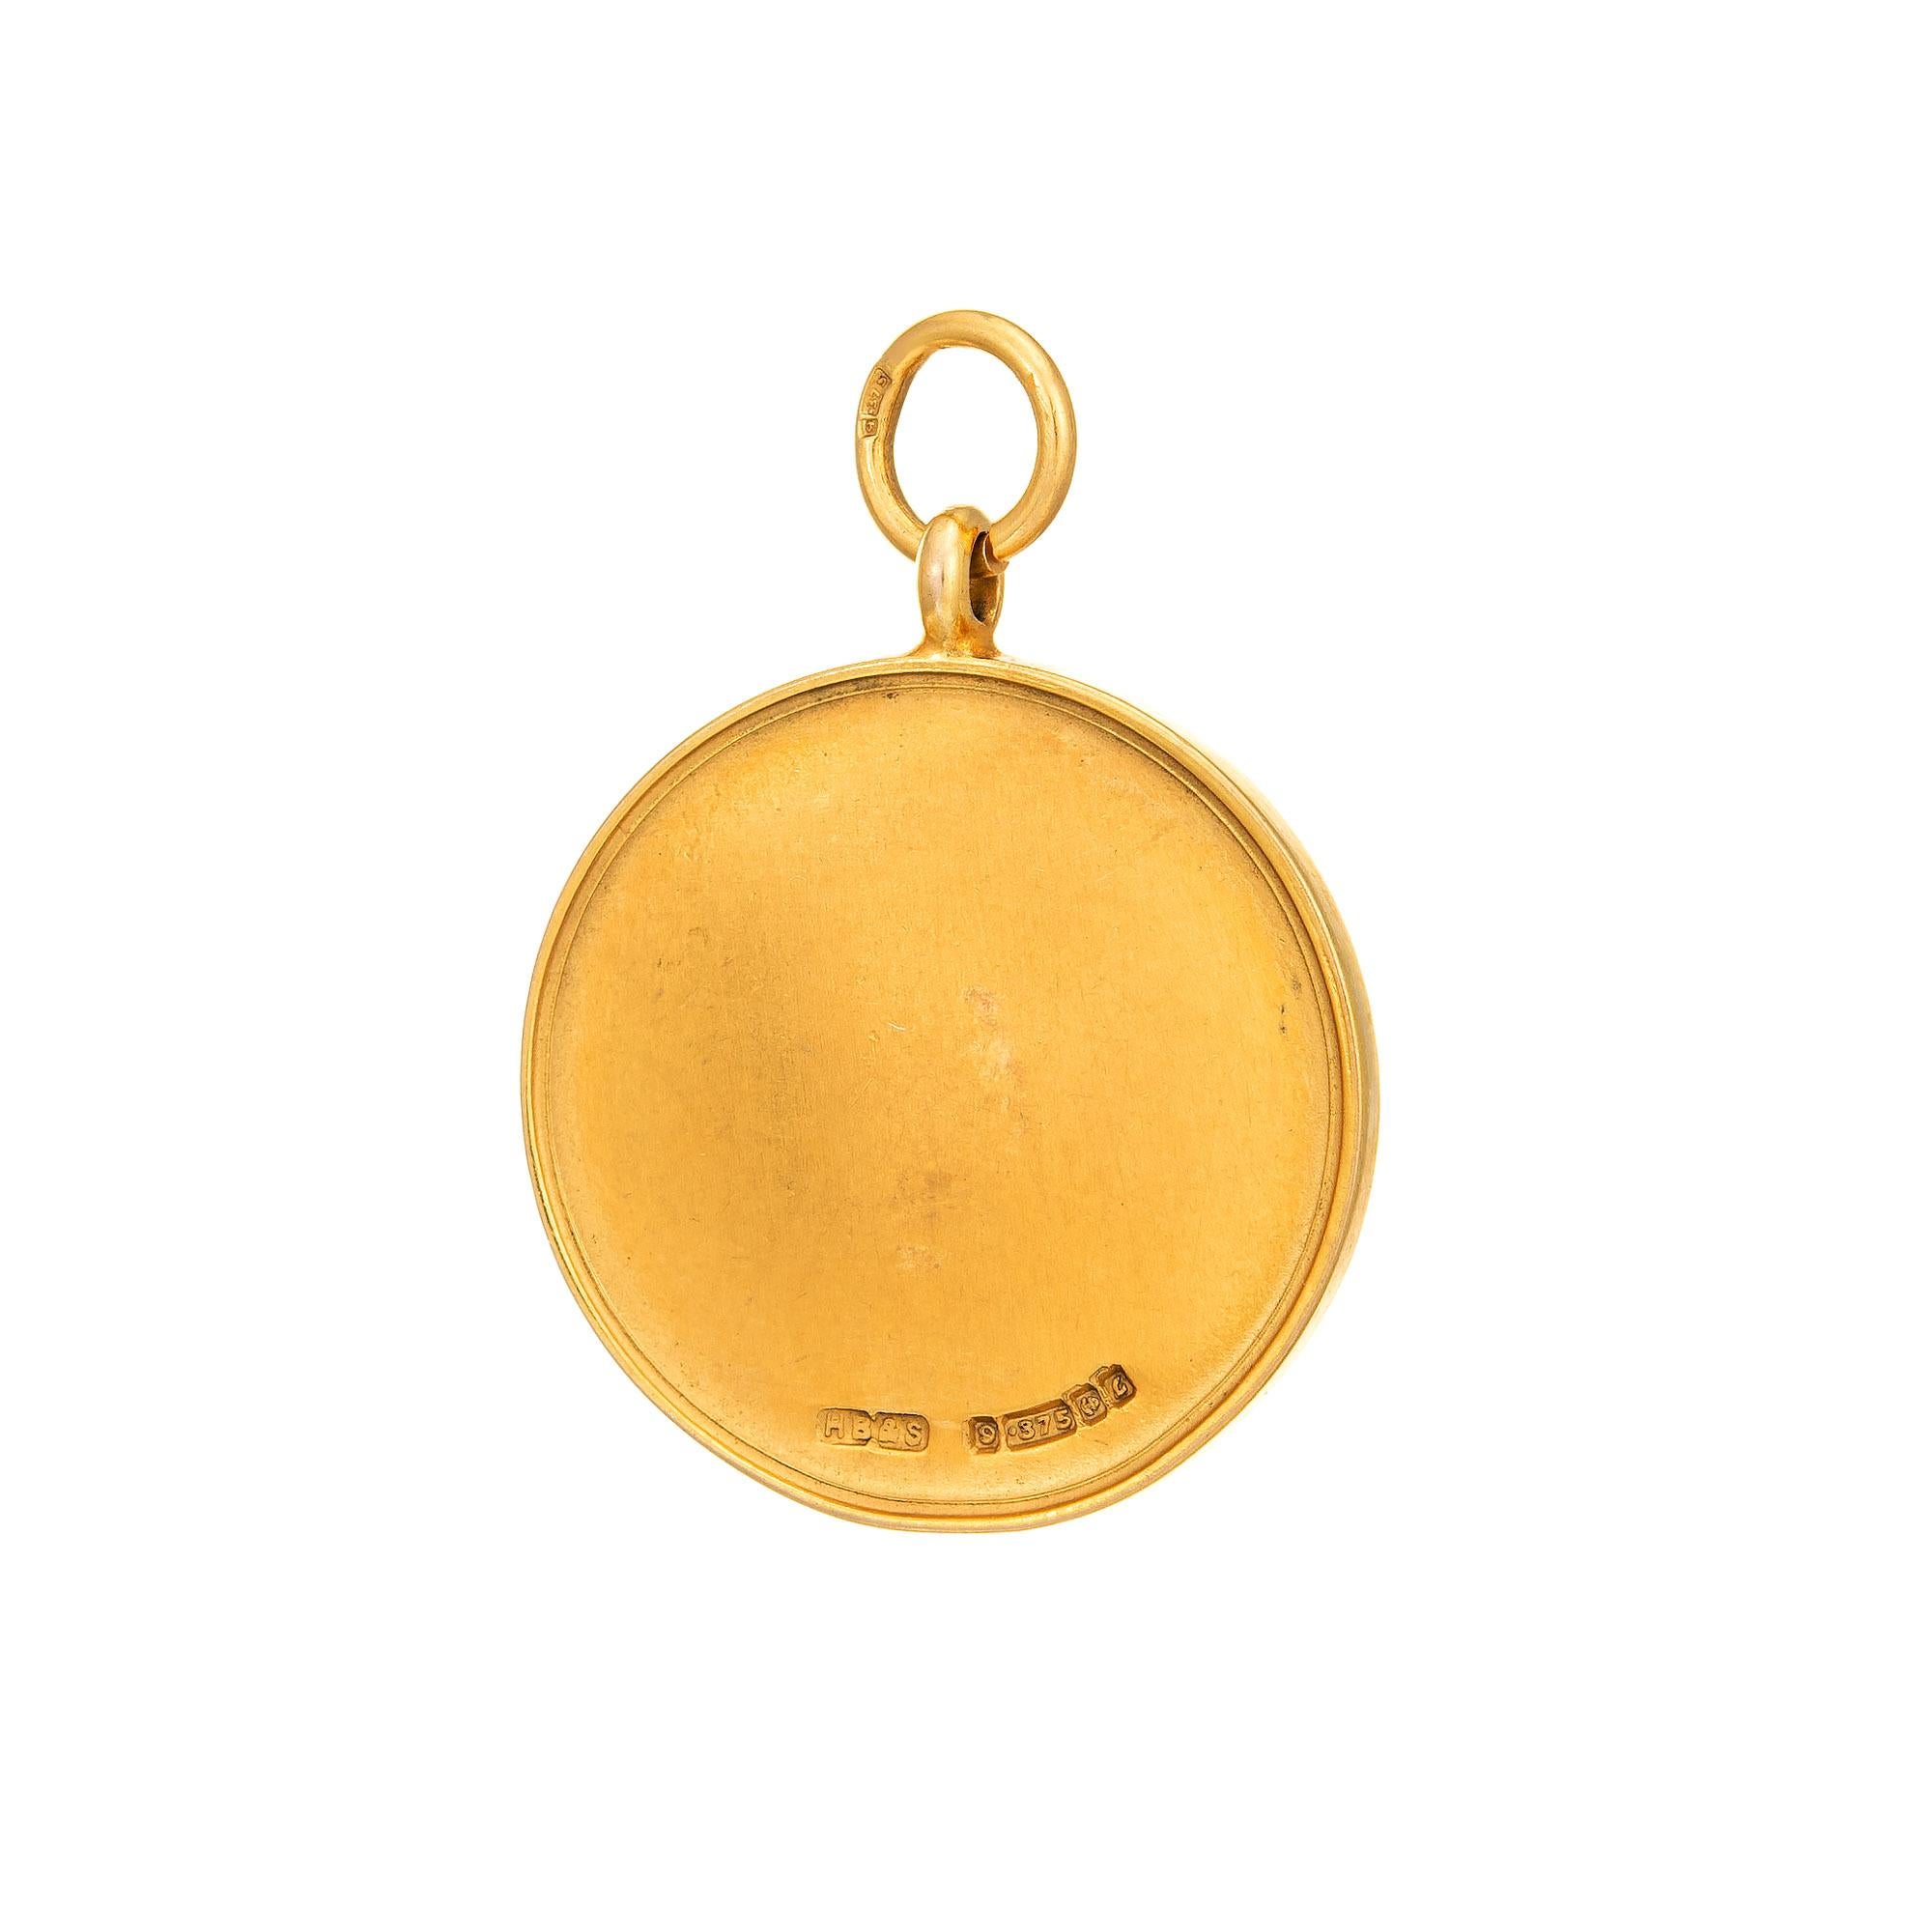 Elaborate vintage Art Deco era medallion (circa 1927) crafted in 9 karat yellow gold. 

The beautifully detailed medallion dates to 1927, designed with a golf motif. Medallions were popular around the 1900s along with watch chains and fobs. The